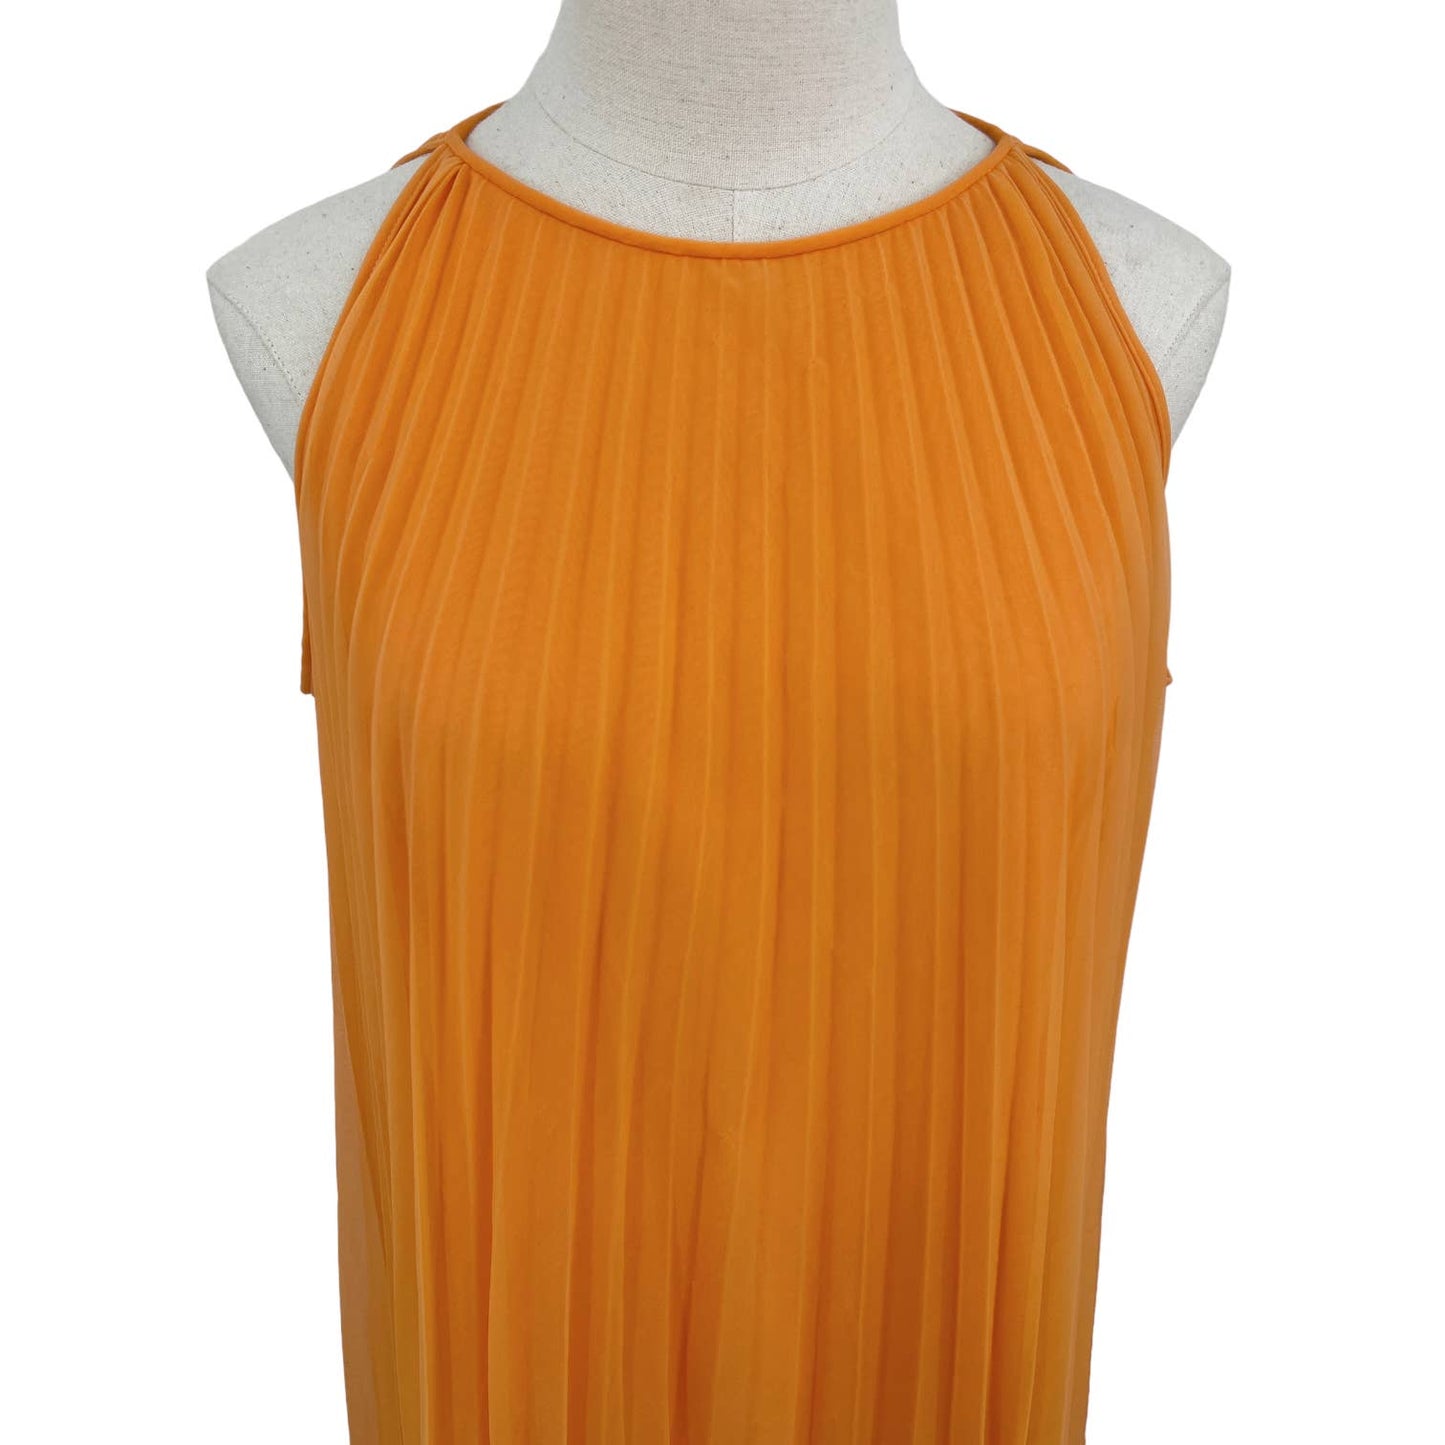 Vintage 60s Orange Pleated Babydoll Nightgown Tent Style Sleeveless Sears S M